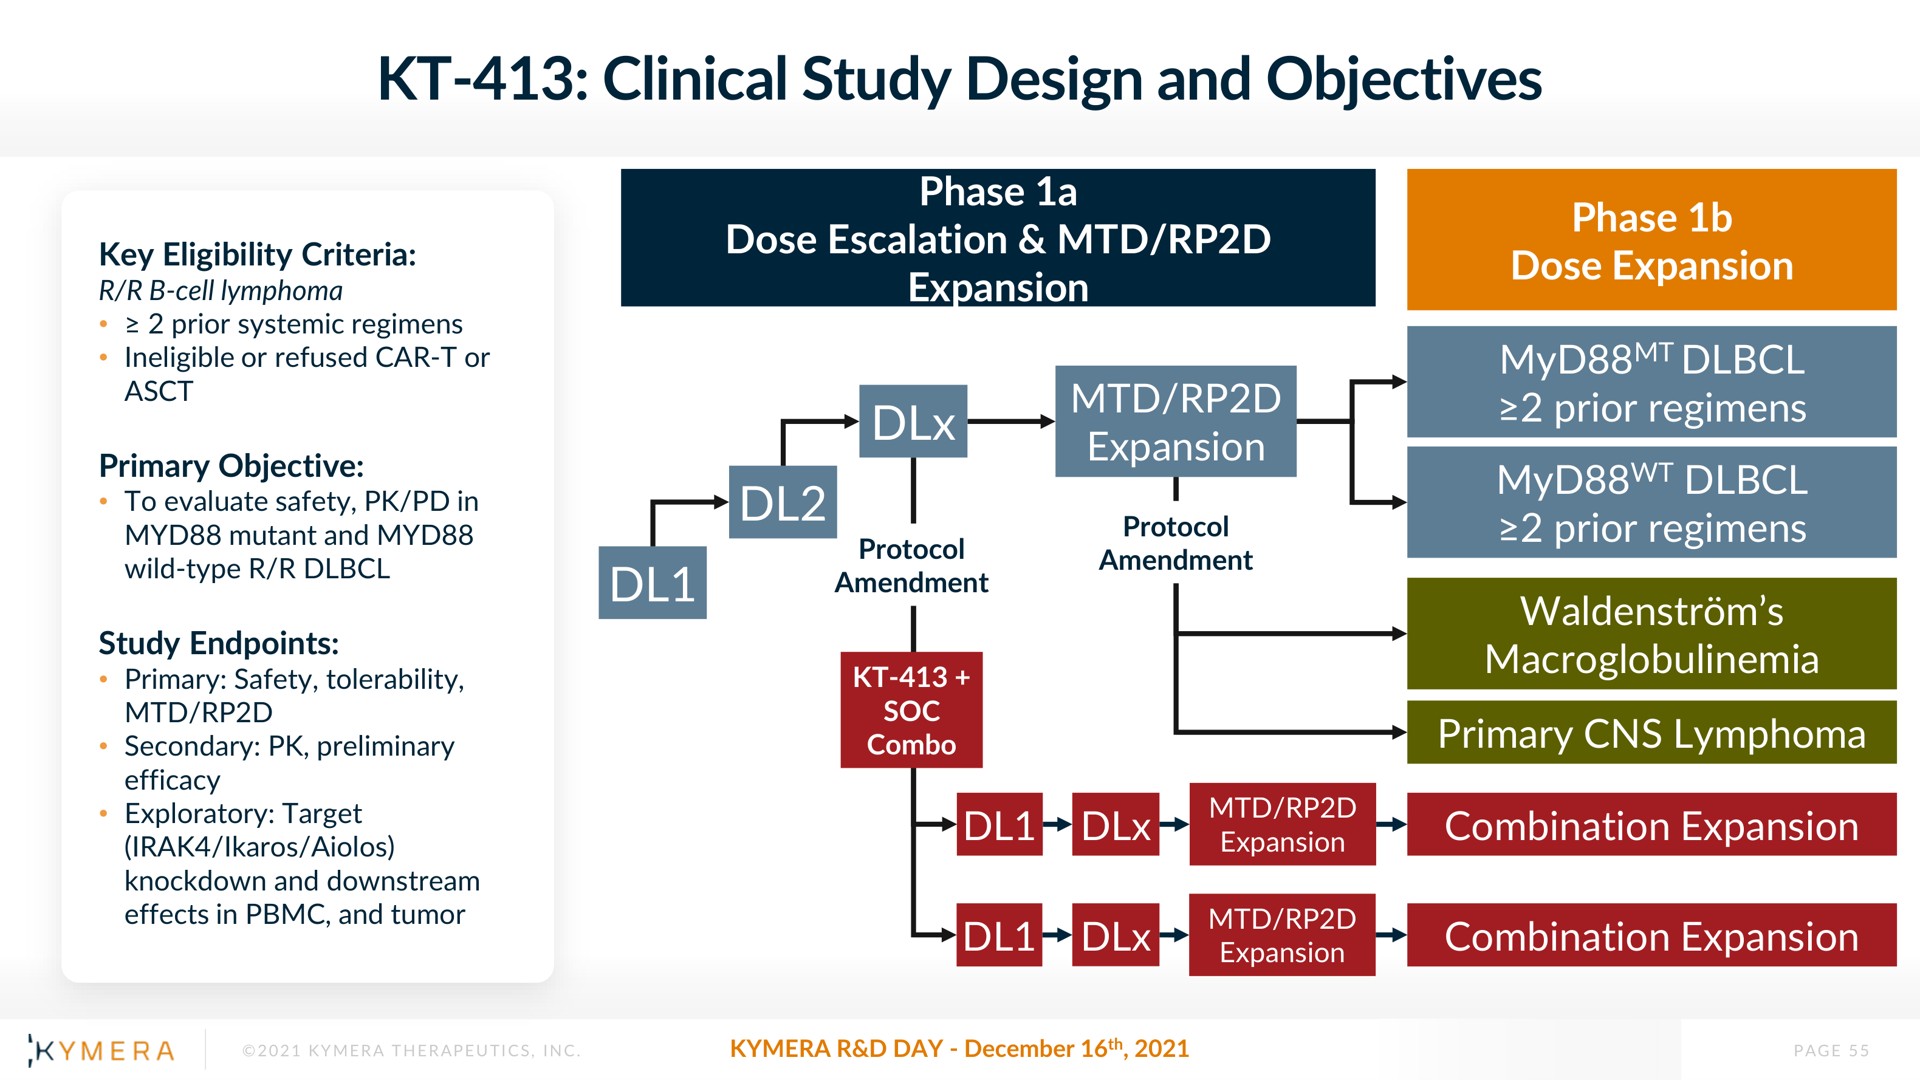 clinical study design and objectives | Kymera